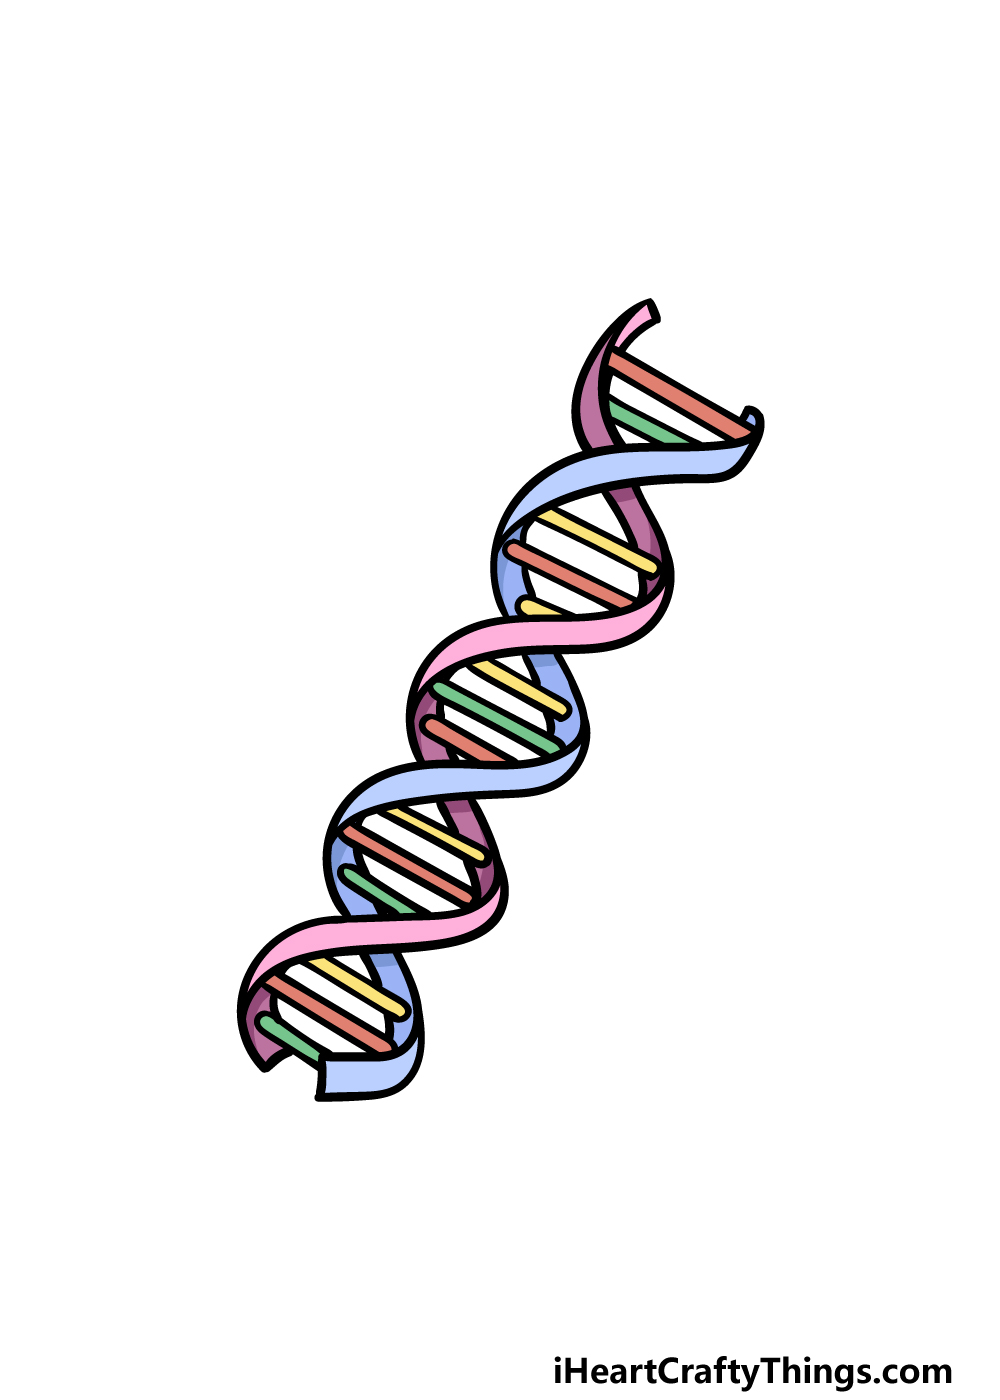 DNA Drawing - How To Draw DNA Step By Step